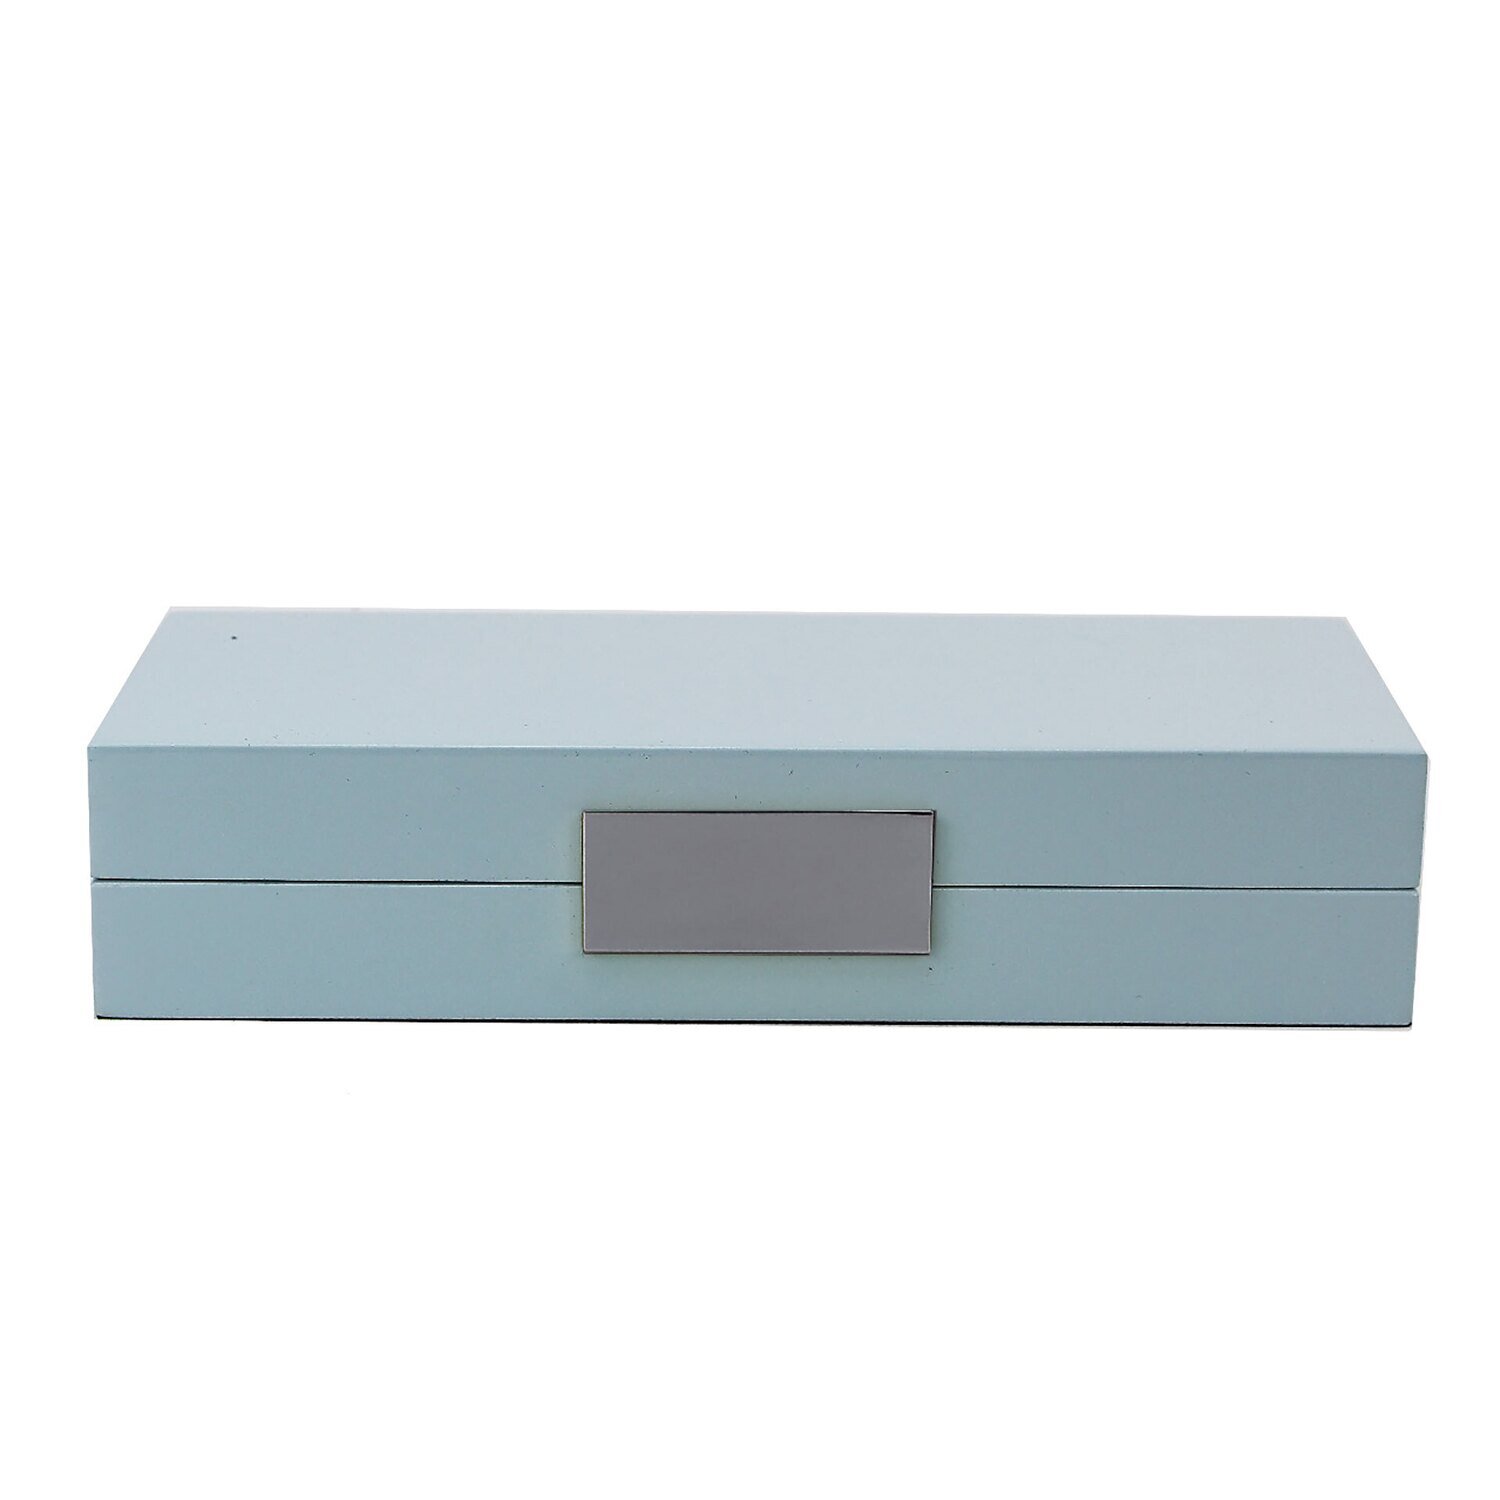 Addison Ross Light Blue Lacquer Box With Gold 4 x 9 Inch Lacquer BX1201